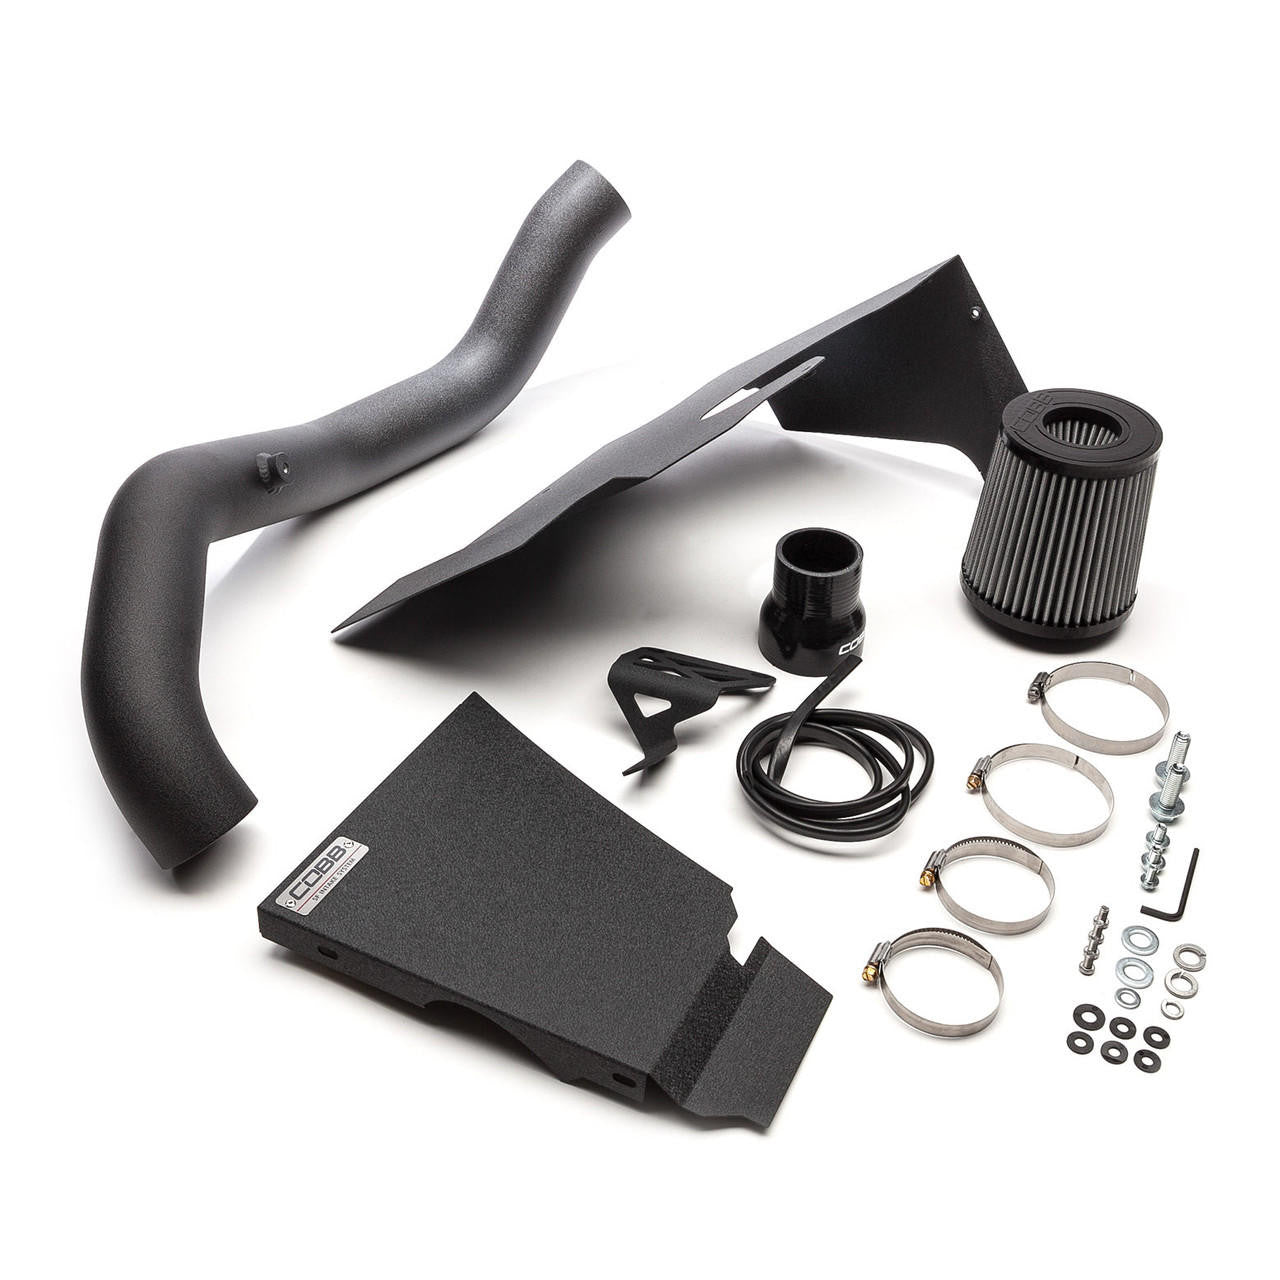  COBB Tuning Cold Air Intake for Ford Mustang Ecoboost 15-17 7M1100 